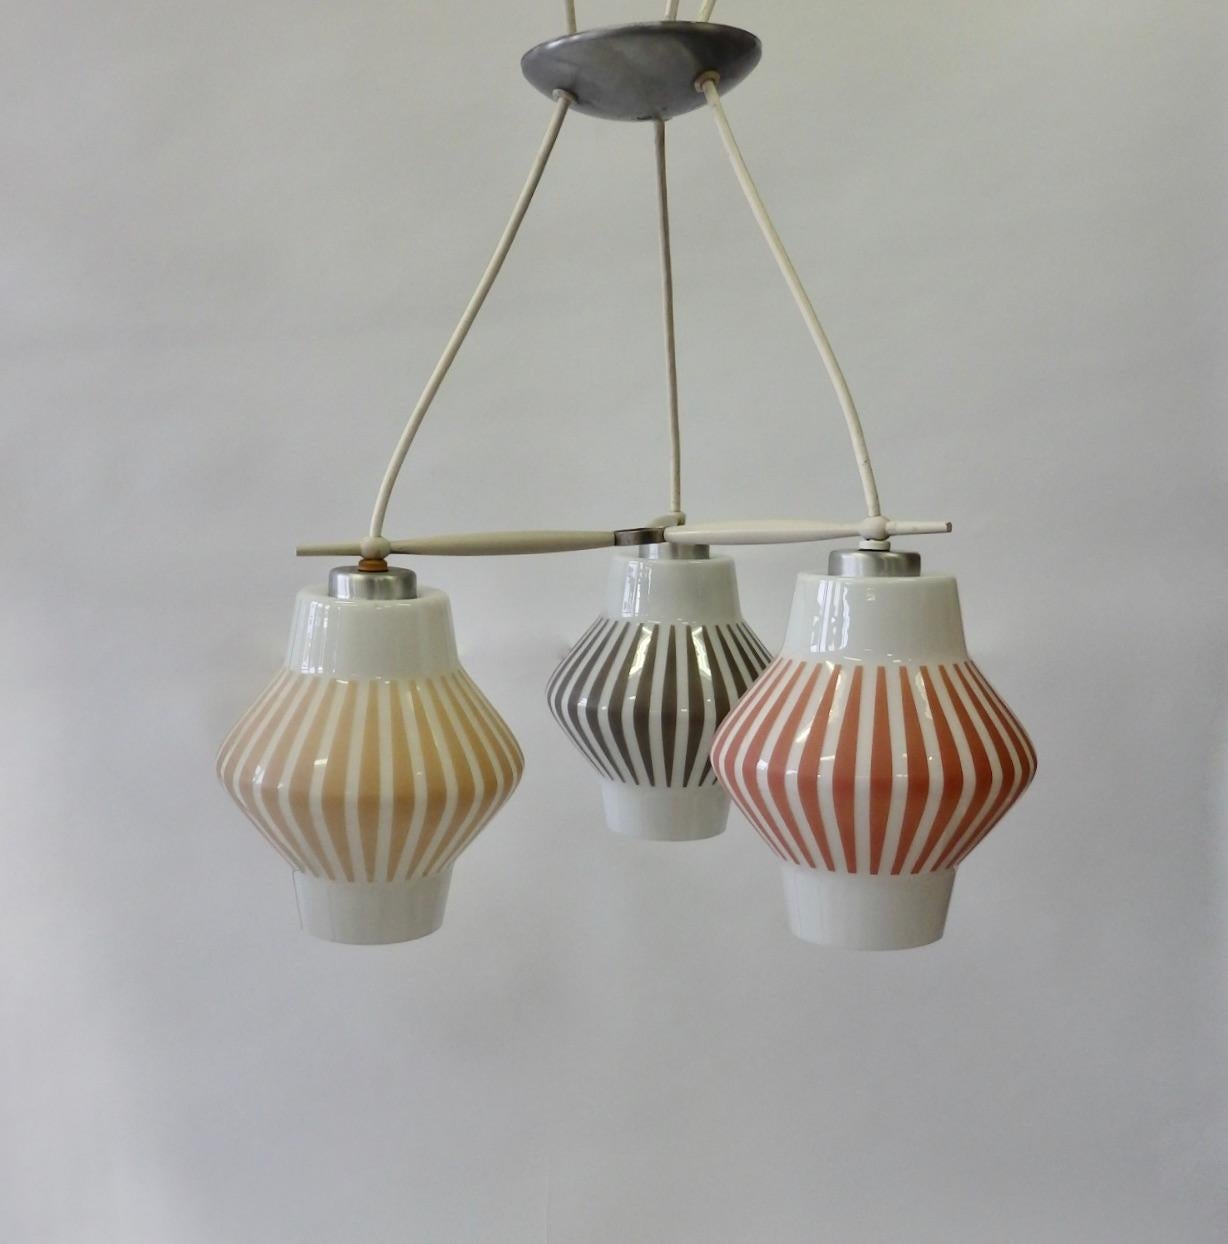 20th Century Midcentury Multicolored 3 Globe Hanging Ceiling Light Fixture For Sale